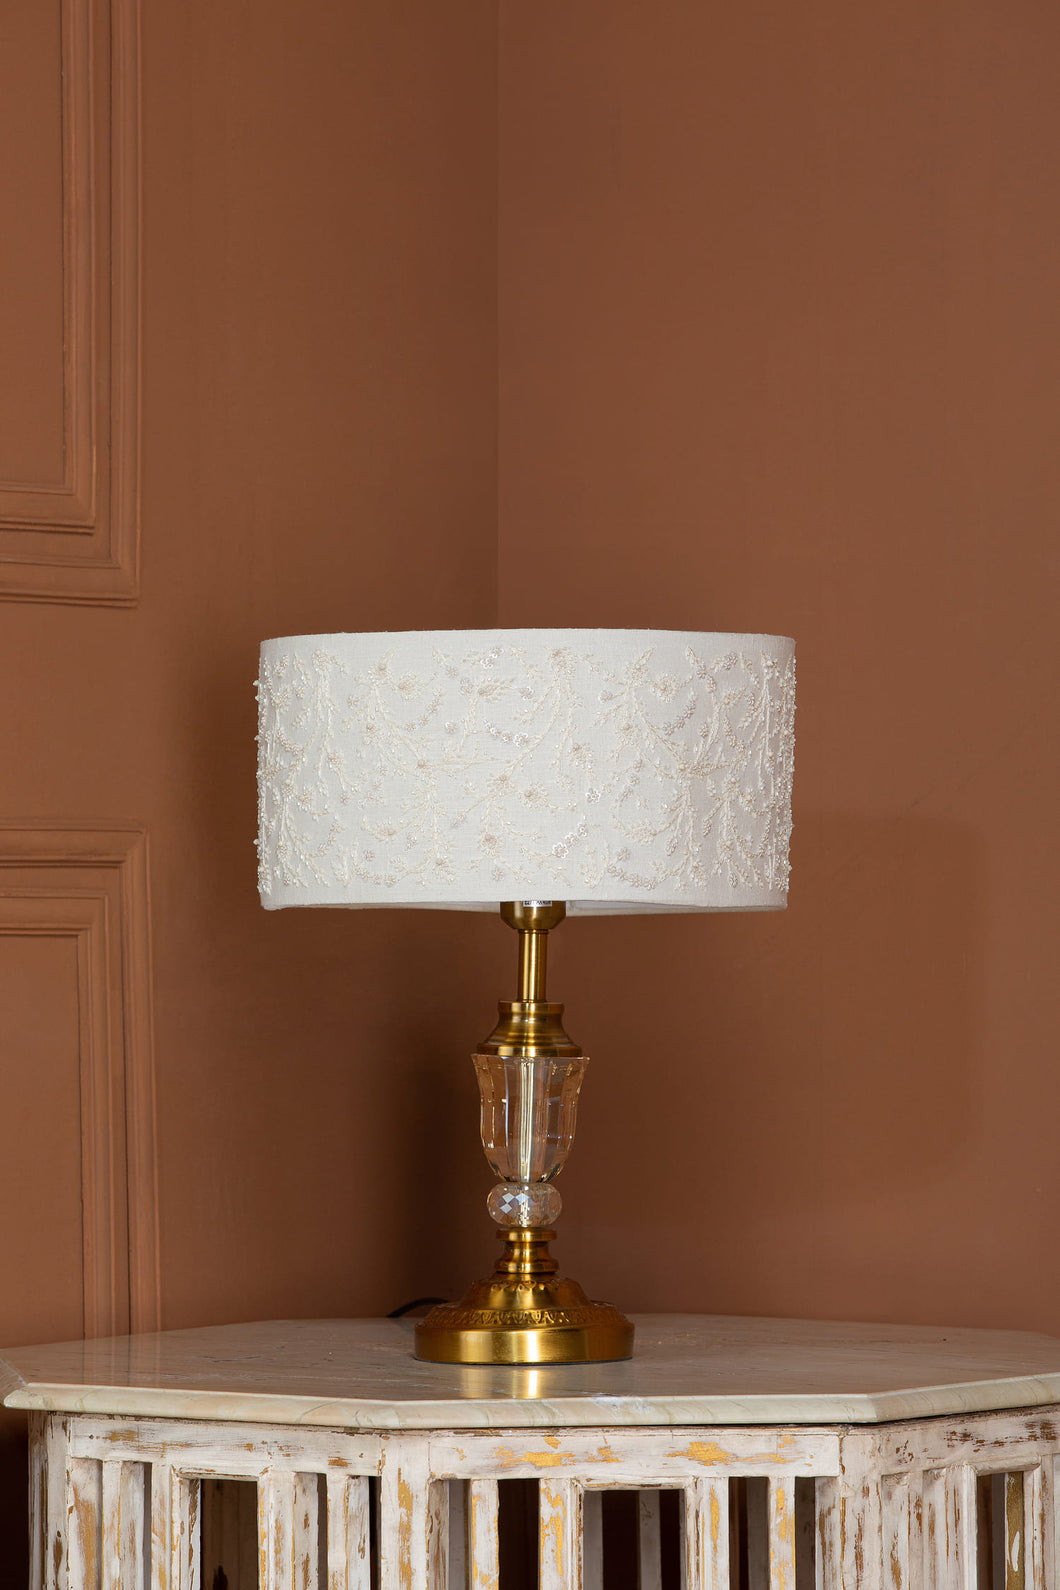 Hand Embroidered Lampshades in Eri Silk